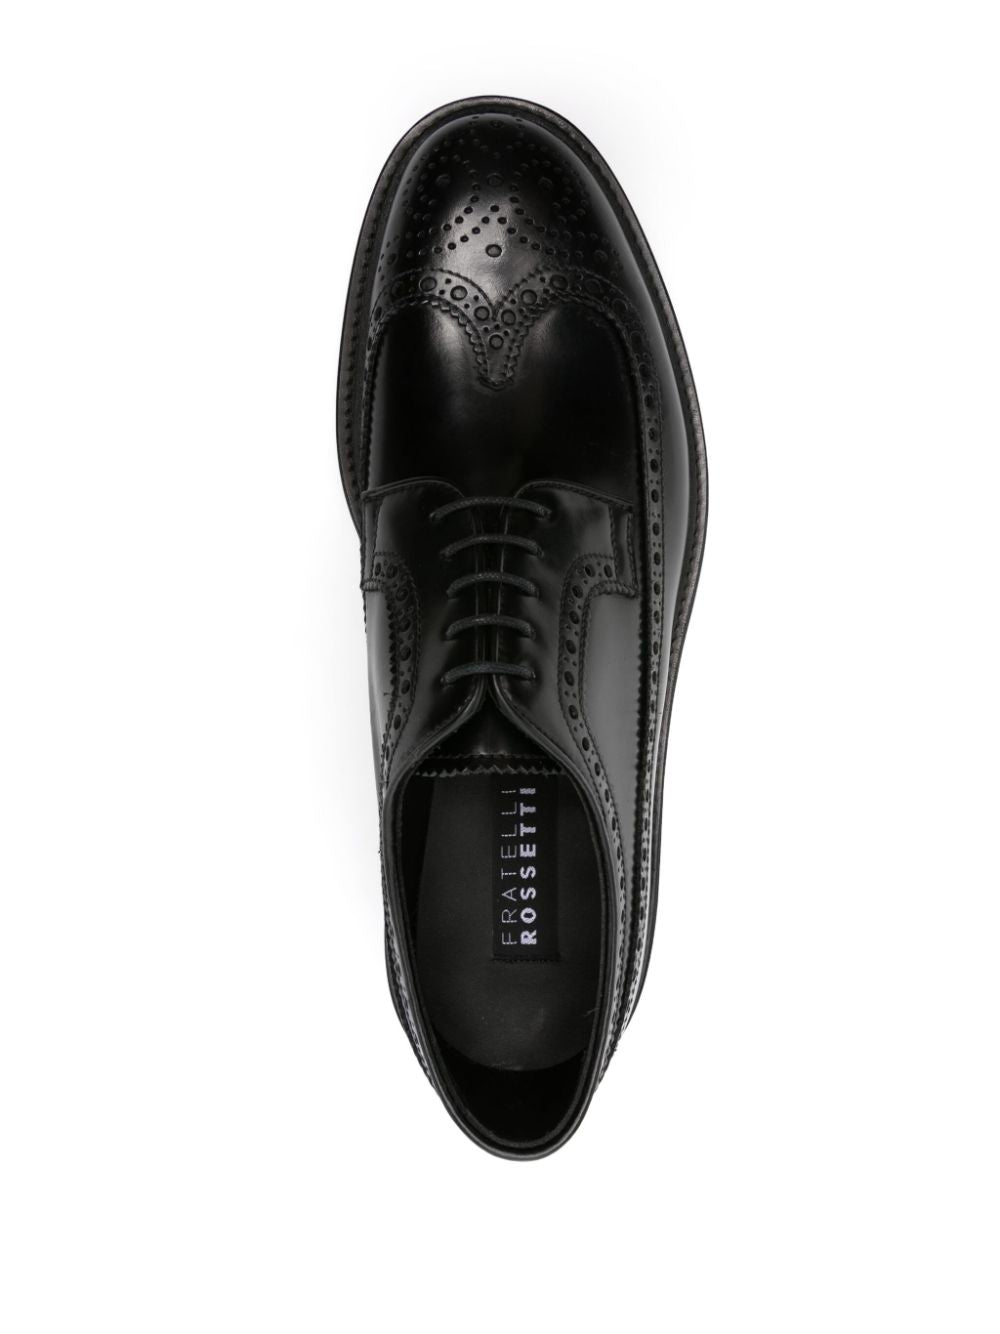 black lace-up brogues